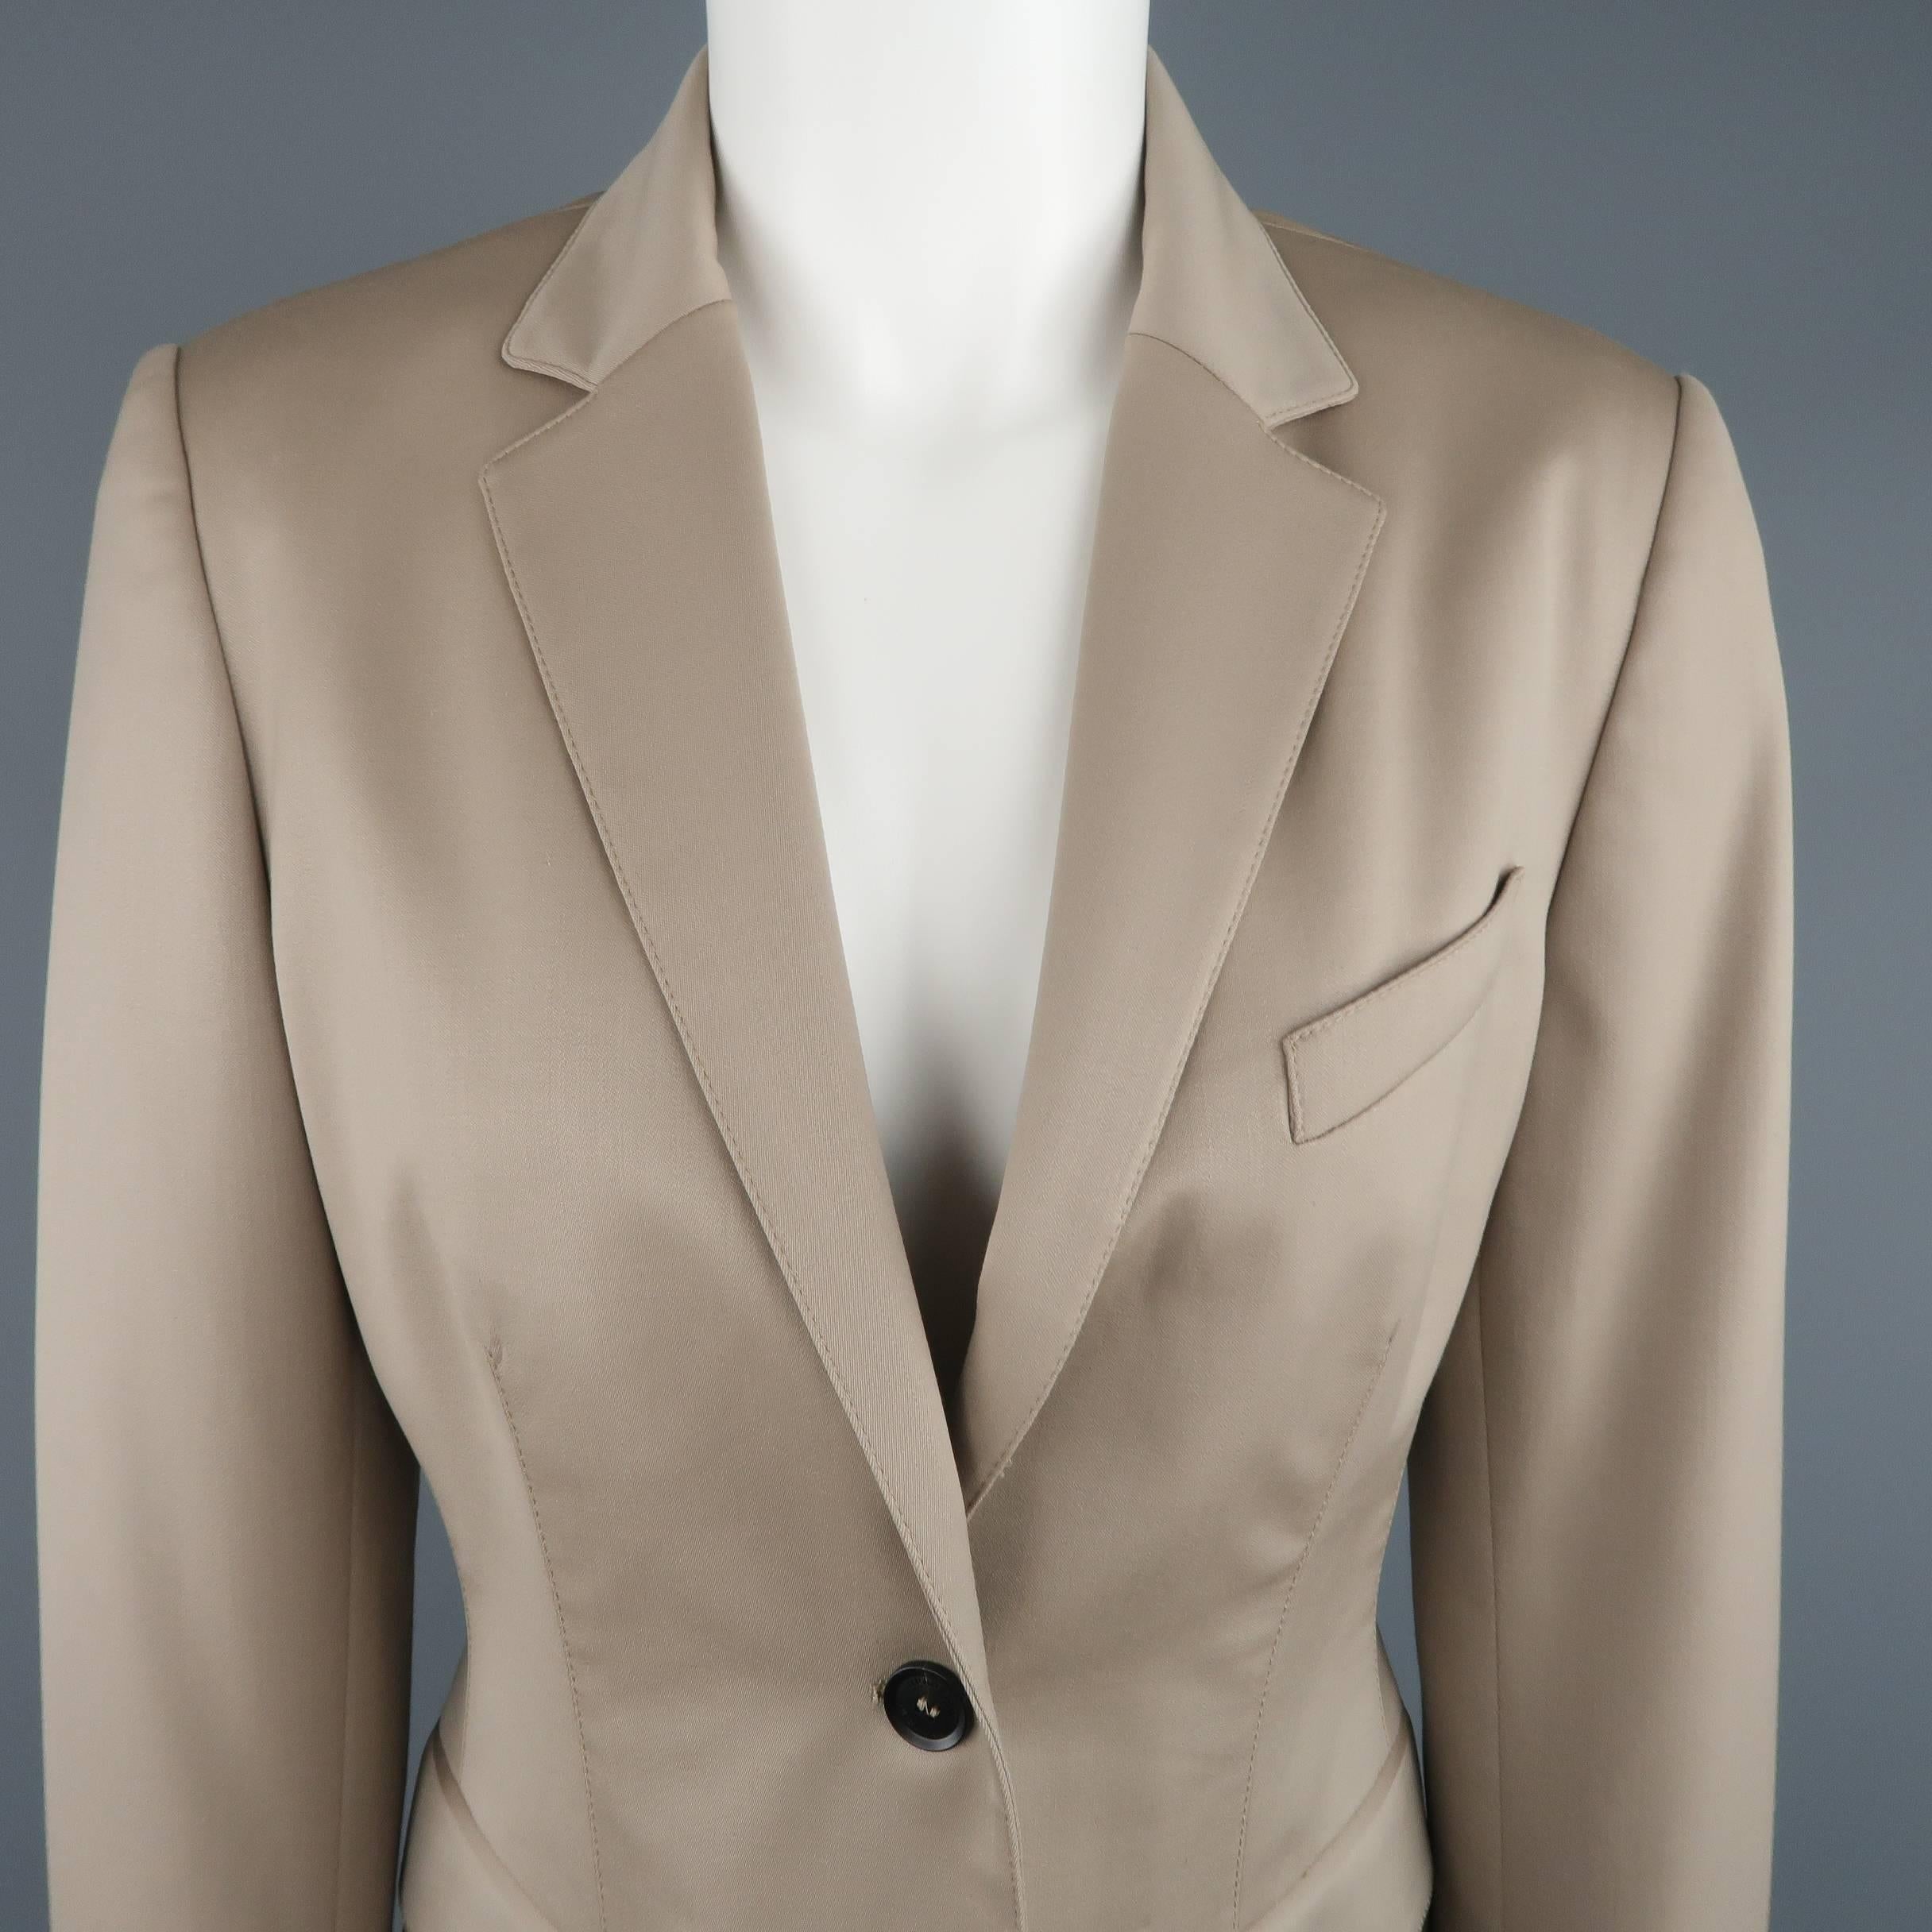 Classic BURBERRY PRORSUM tailored sport coat blazer in a light weight khaki beige stretch virgin wool material featuring a notch lapel, single breasted, two button closure, and faux flap pockets. Made in Italy.
 
Excellent Pre-Owned